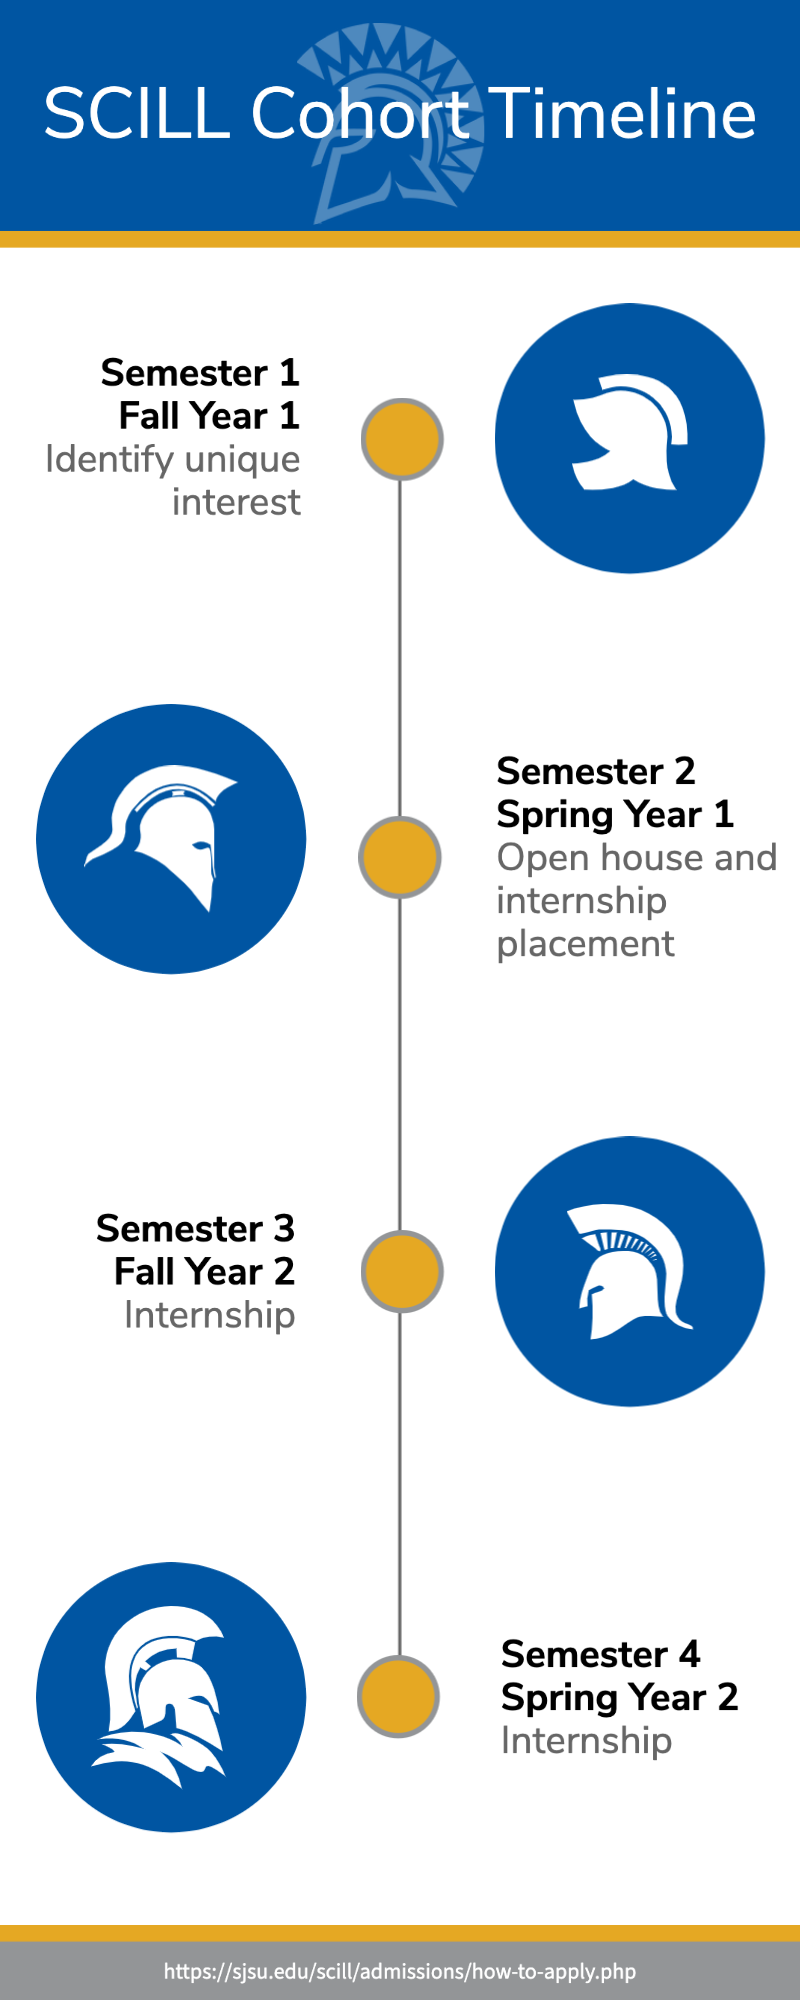 Timeline image of the SCILL internship placement